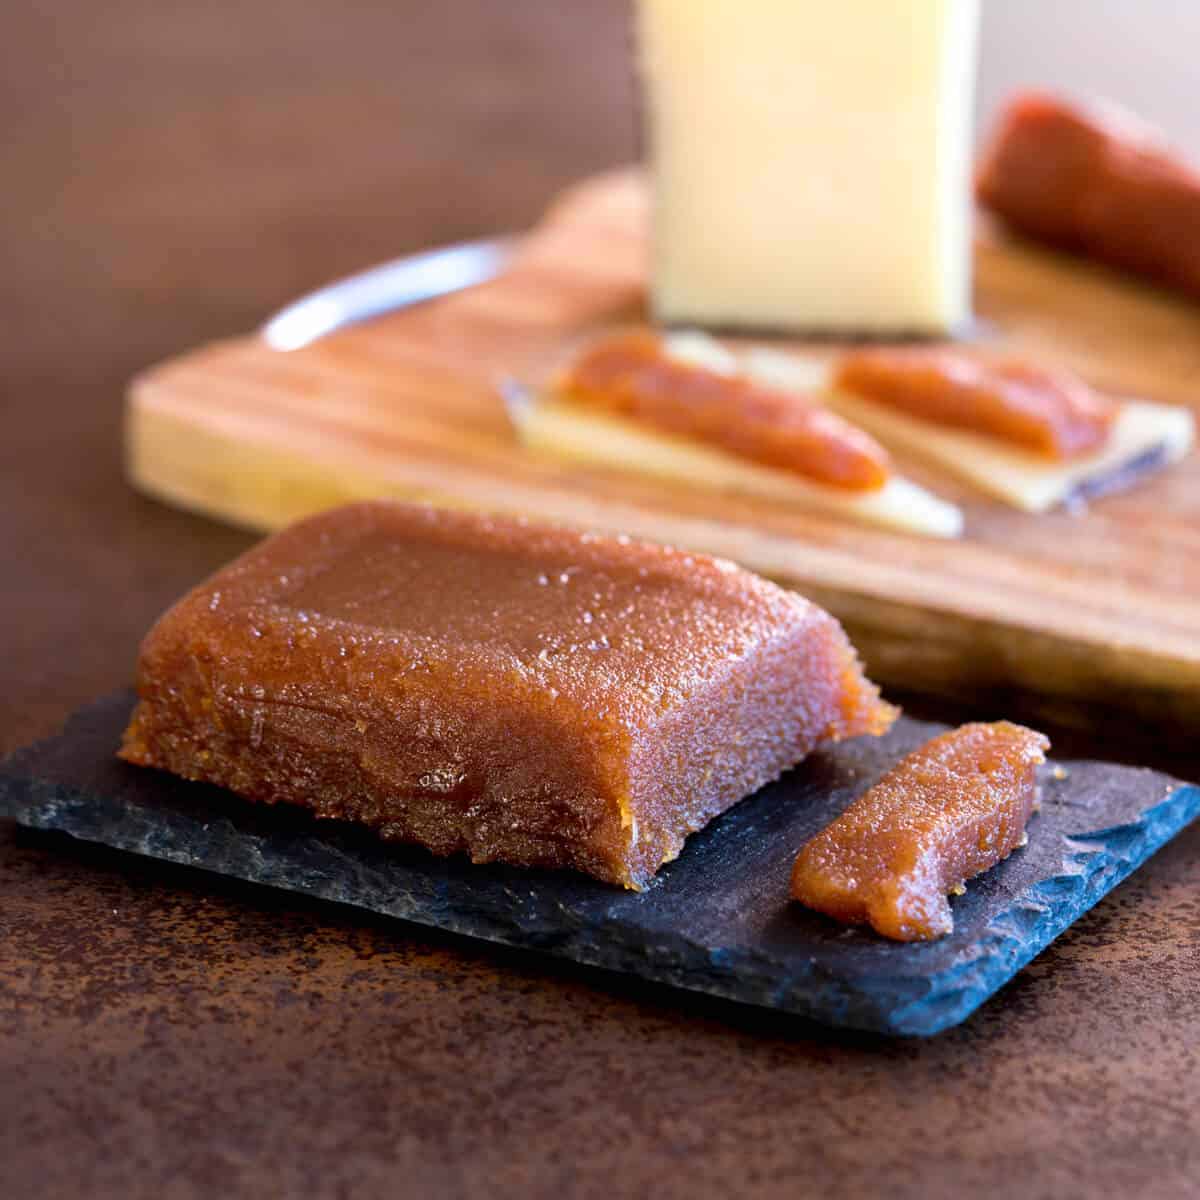 A block of homemade sweet quince paste (dulce de membrillo) on a black rectangular platter, in front of a cutting board with manchego cheese and chorizo sausage.